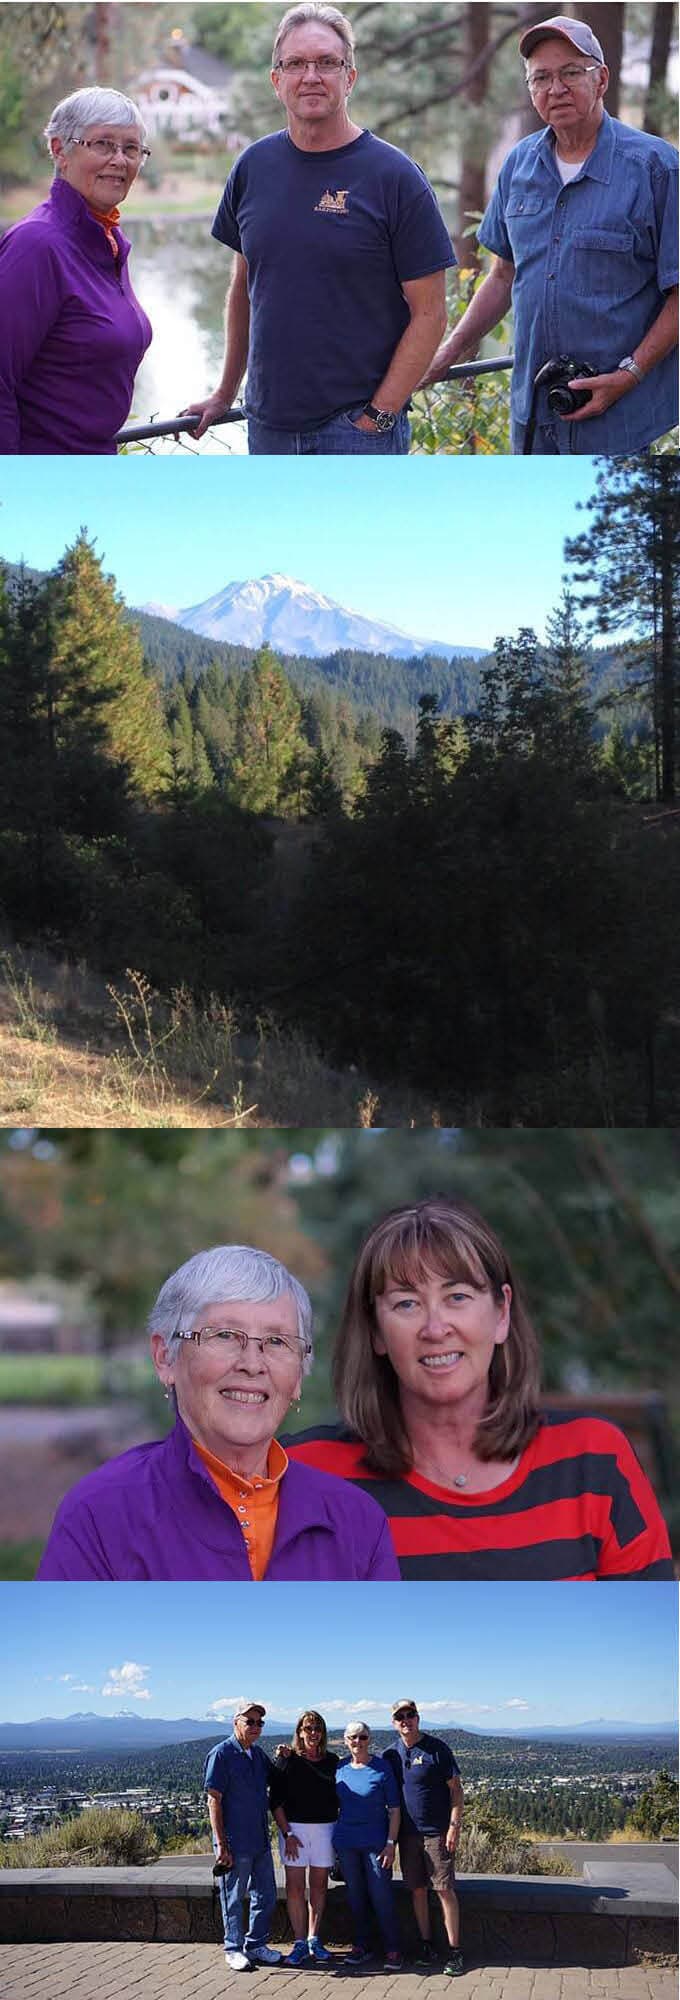 Collage of family photos and a picture of Mount Shasta